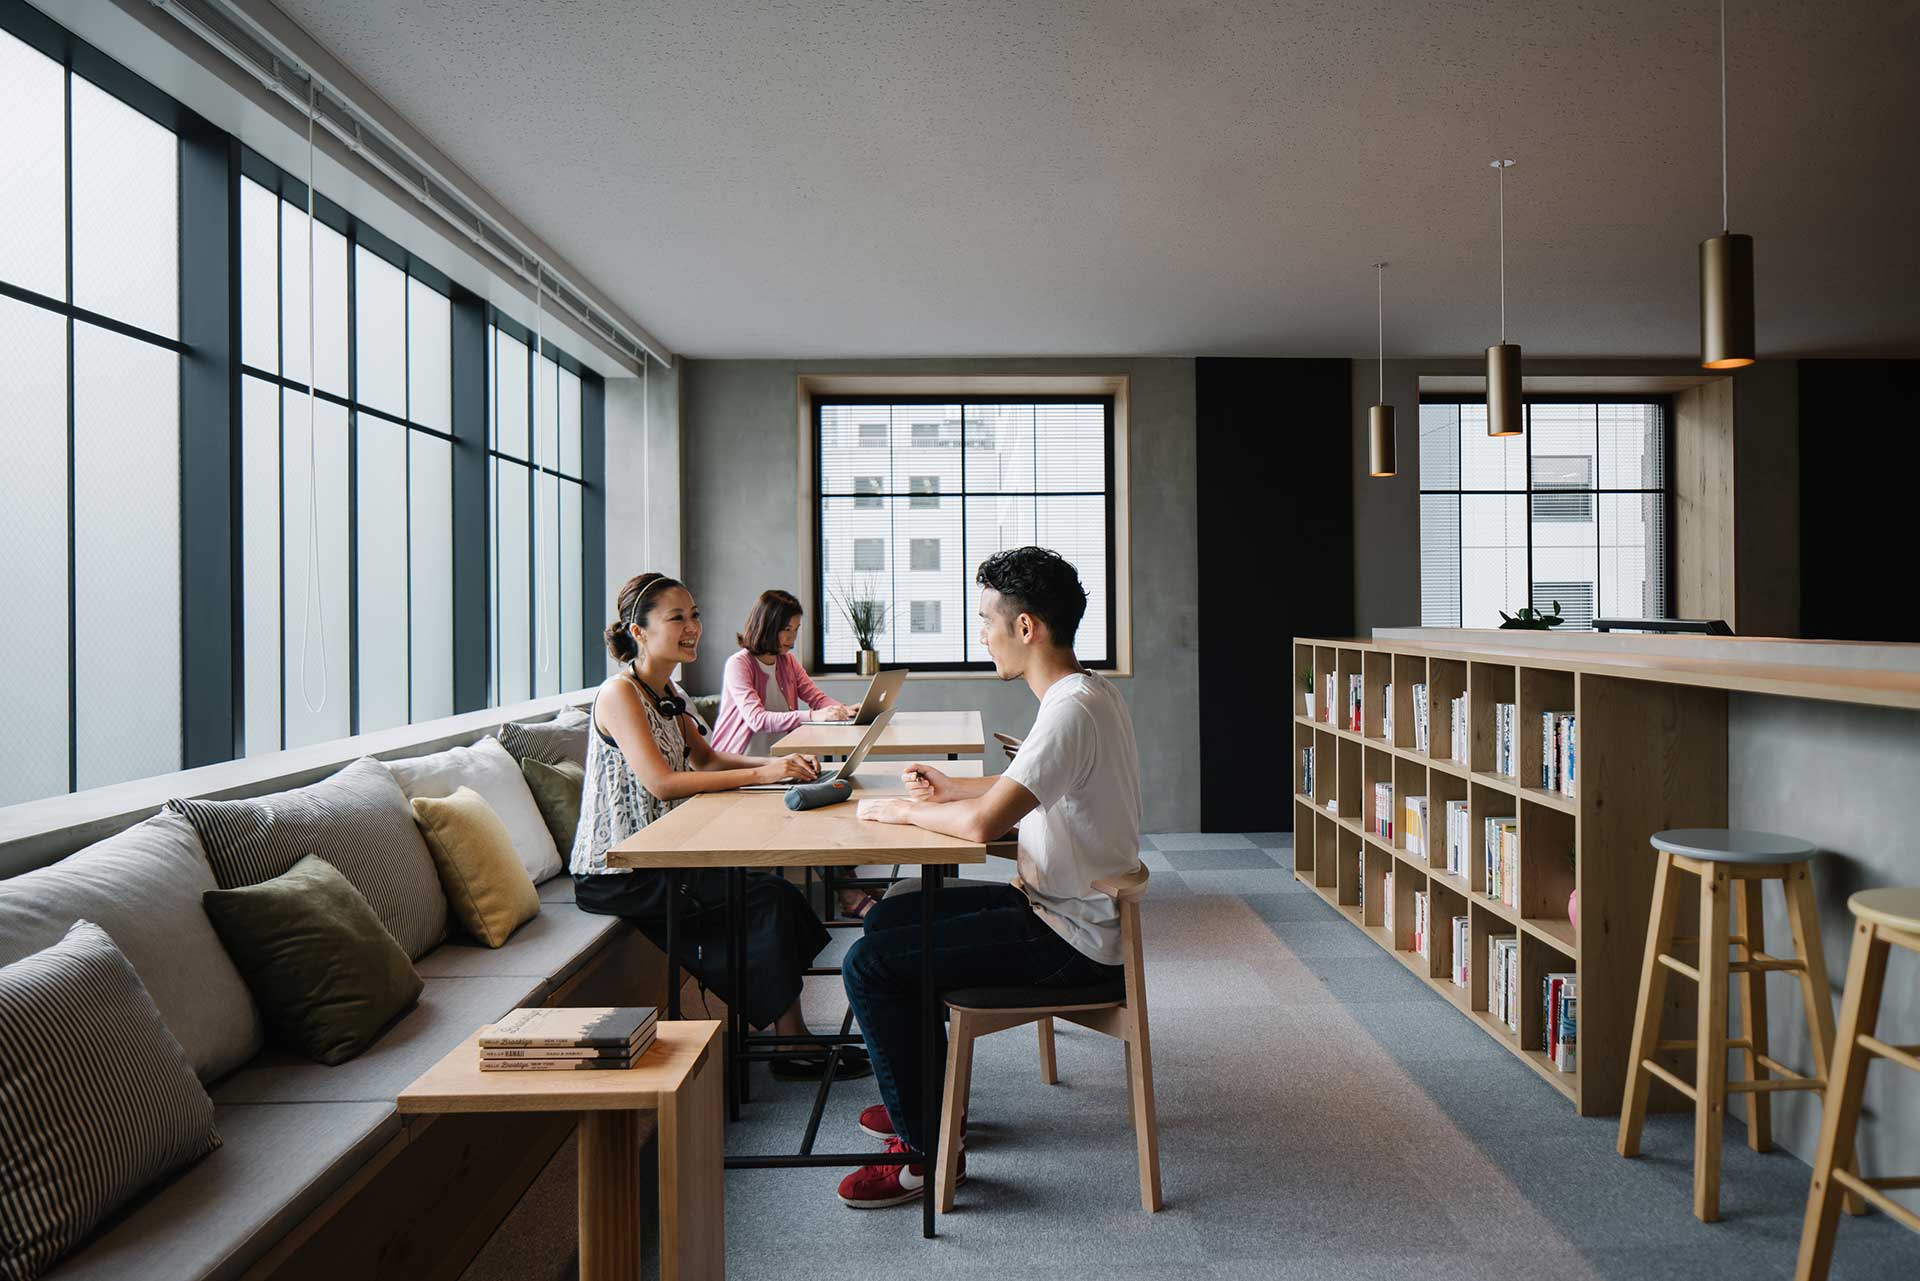 Three people sit in a minimal, clean workspace with cubby bookshelves and window benches.